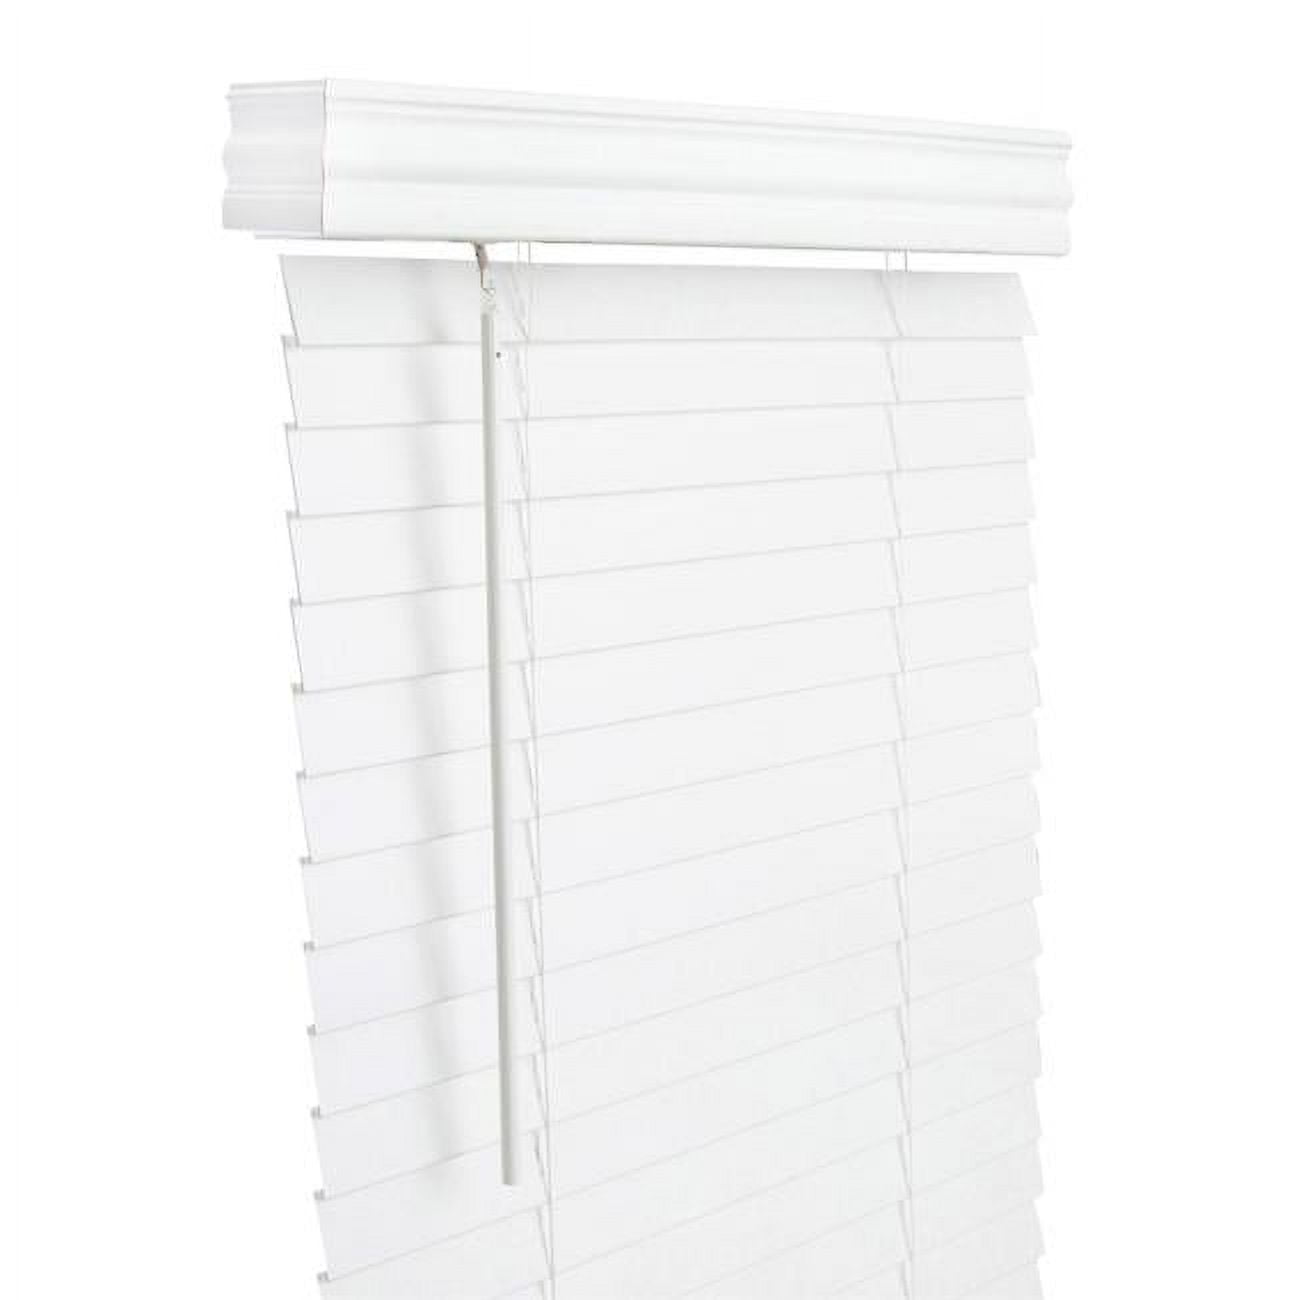 5005723 Faux Wood 2 In. Mini-blinds, 43 X 60 In. White Cordless